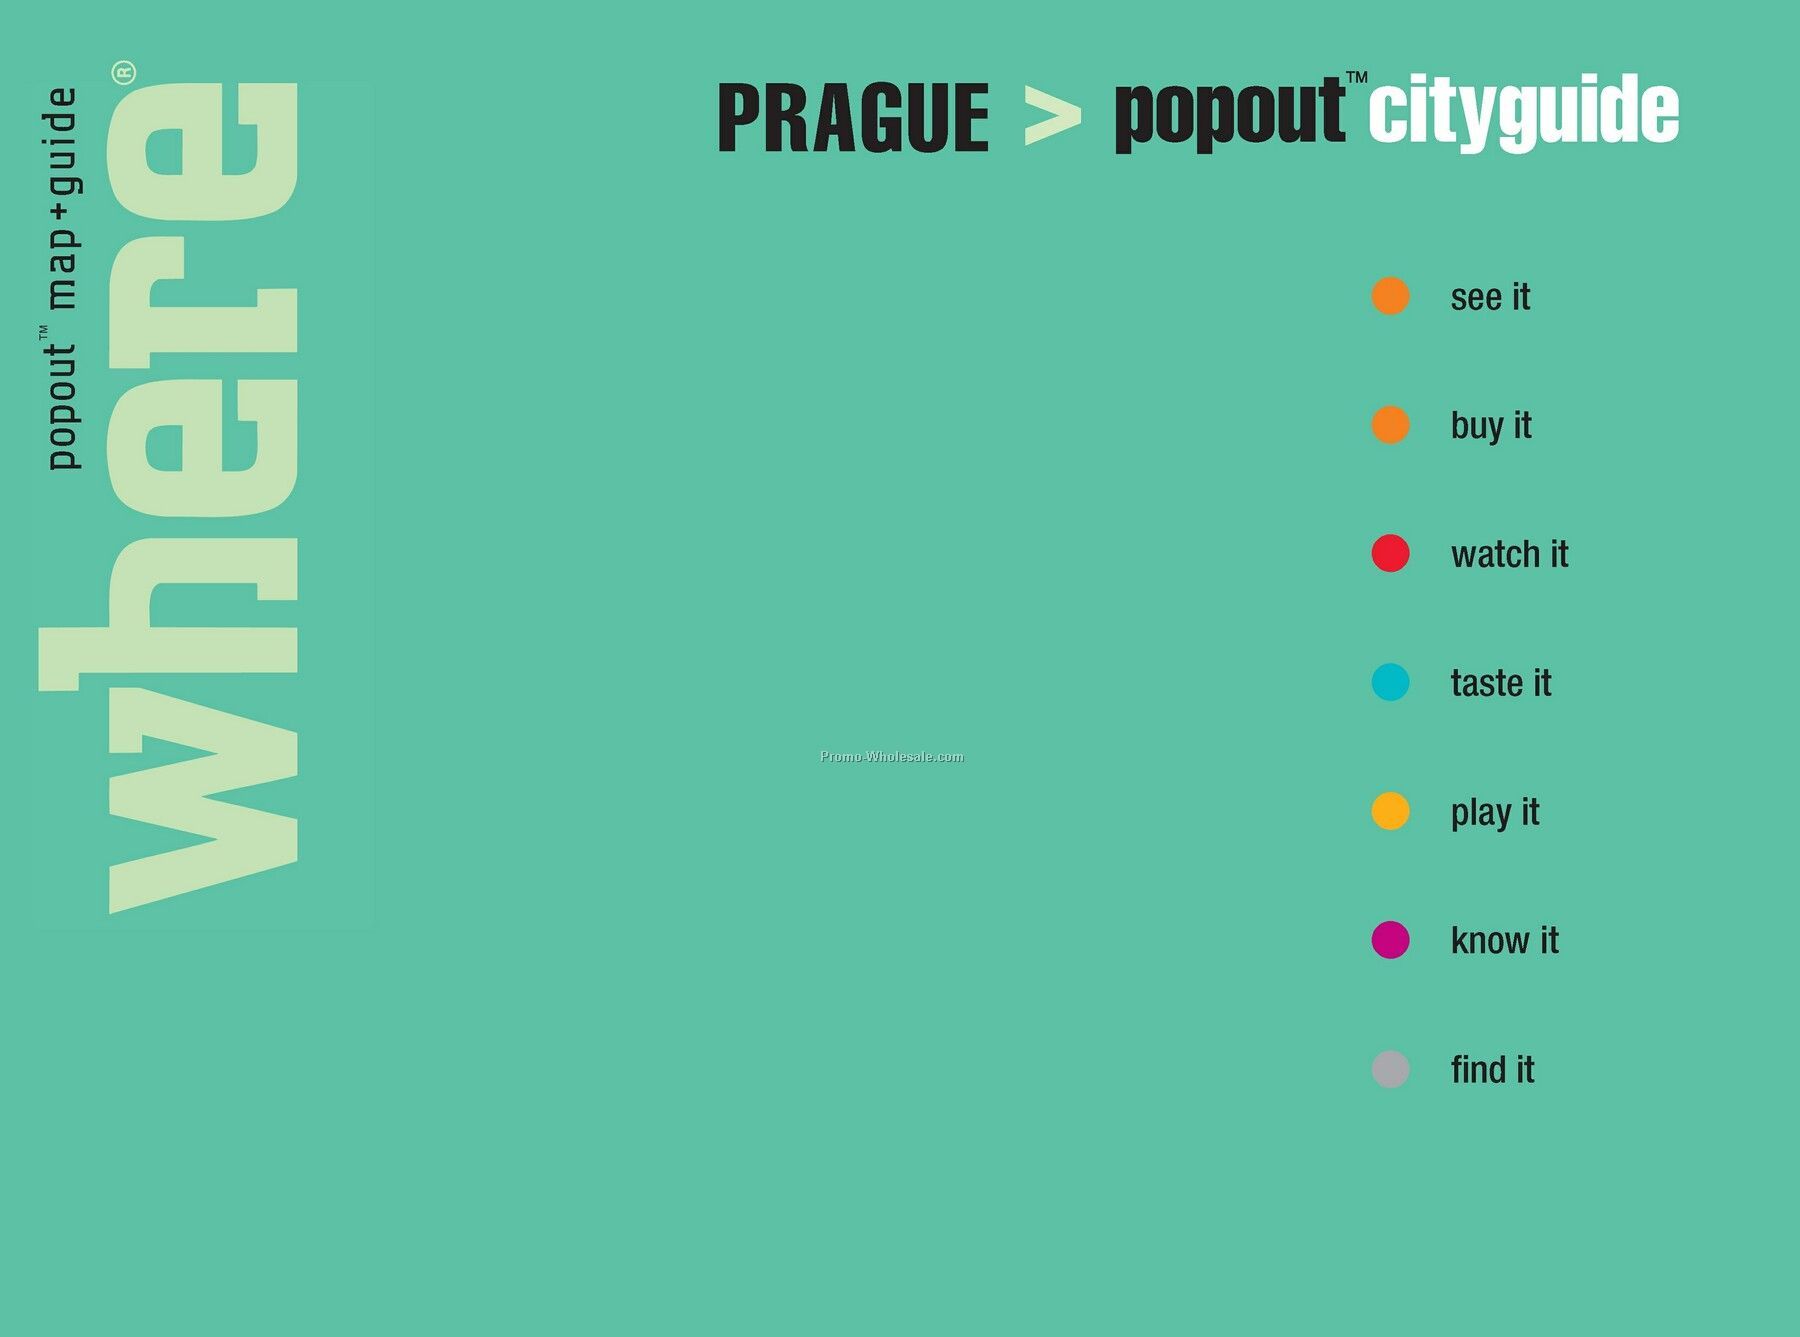 Travel Guides - International Guide Of Prague - Featuring Popout Maps